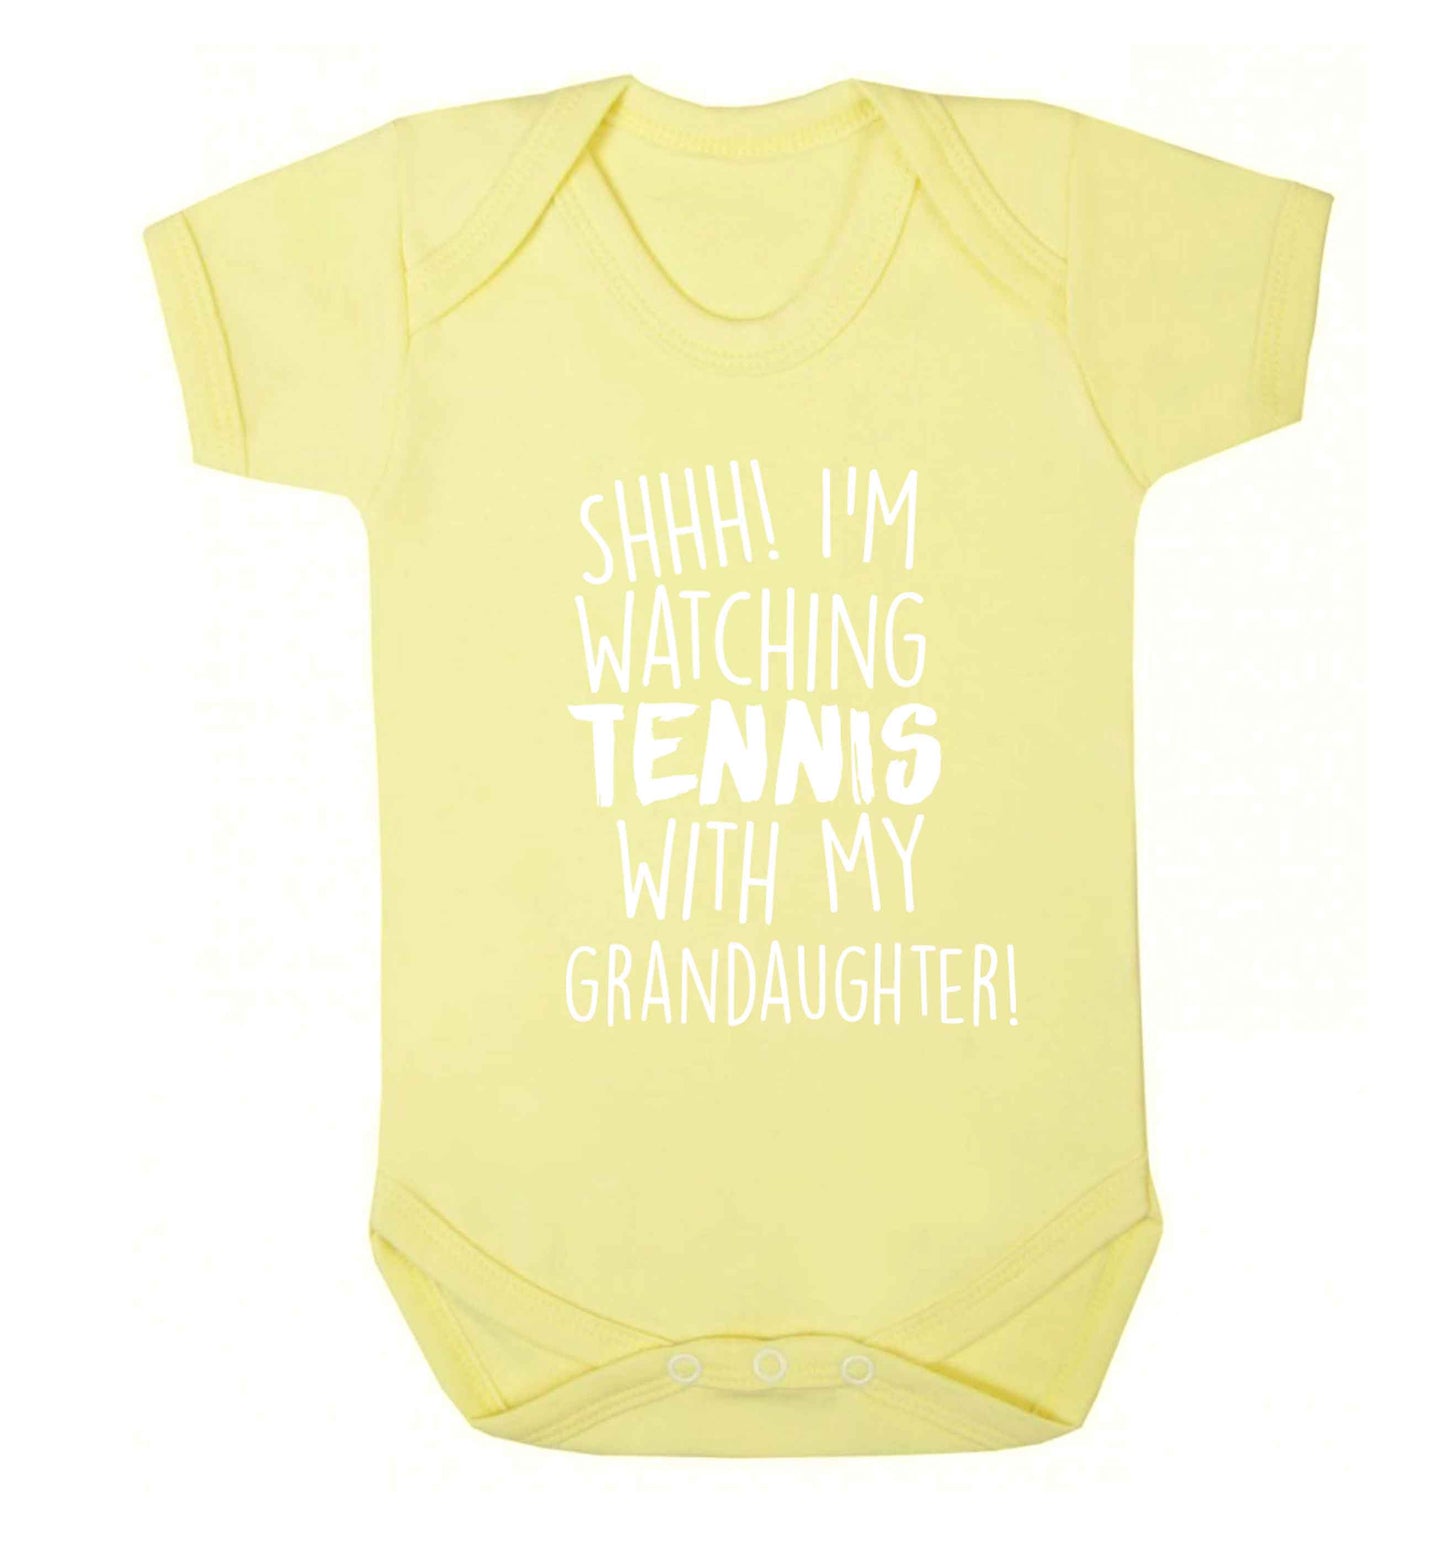 Shh! I'm watching tennis with my granddaughter! Baby Vest pale yellow 18-24 months